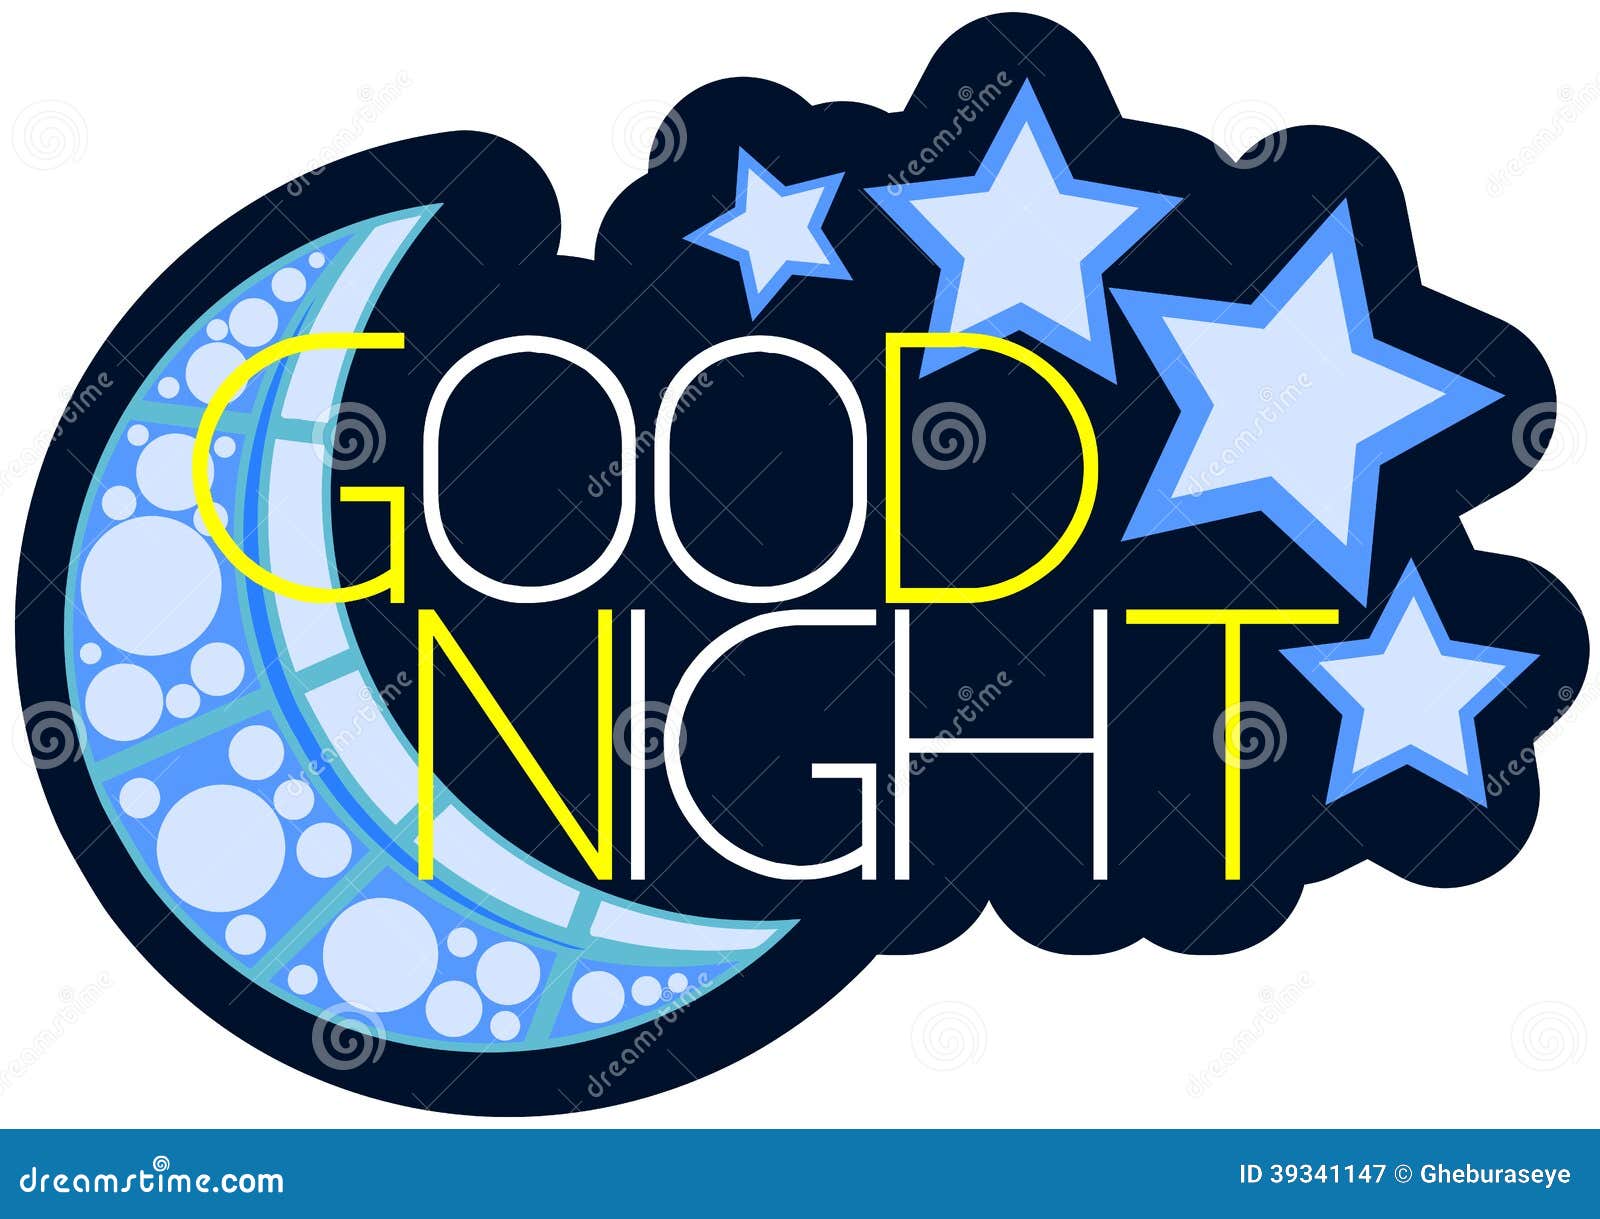 good night clipart free download - photo #35